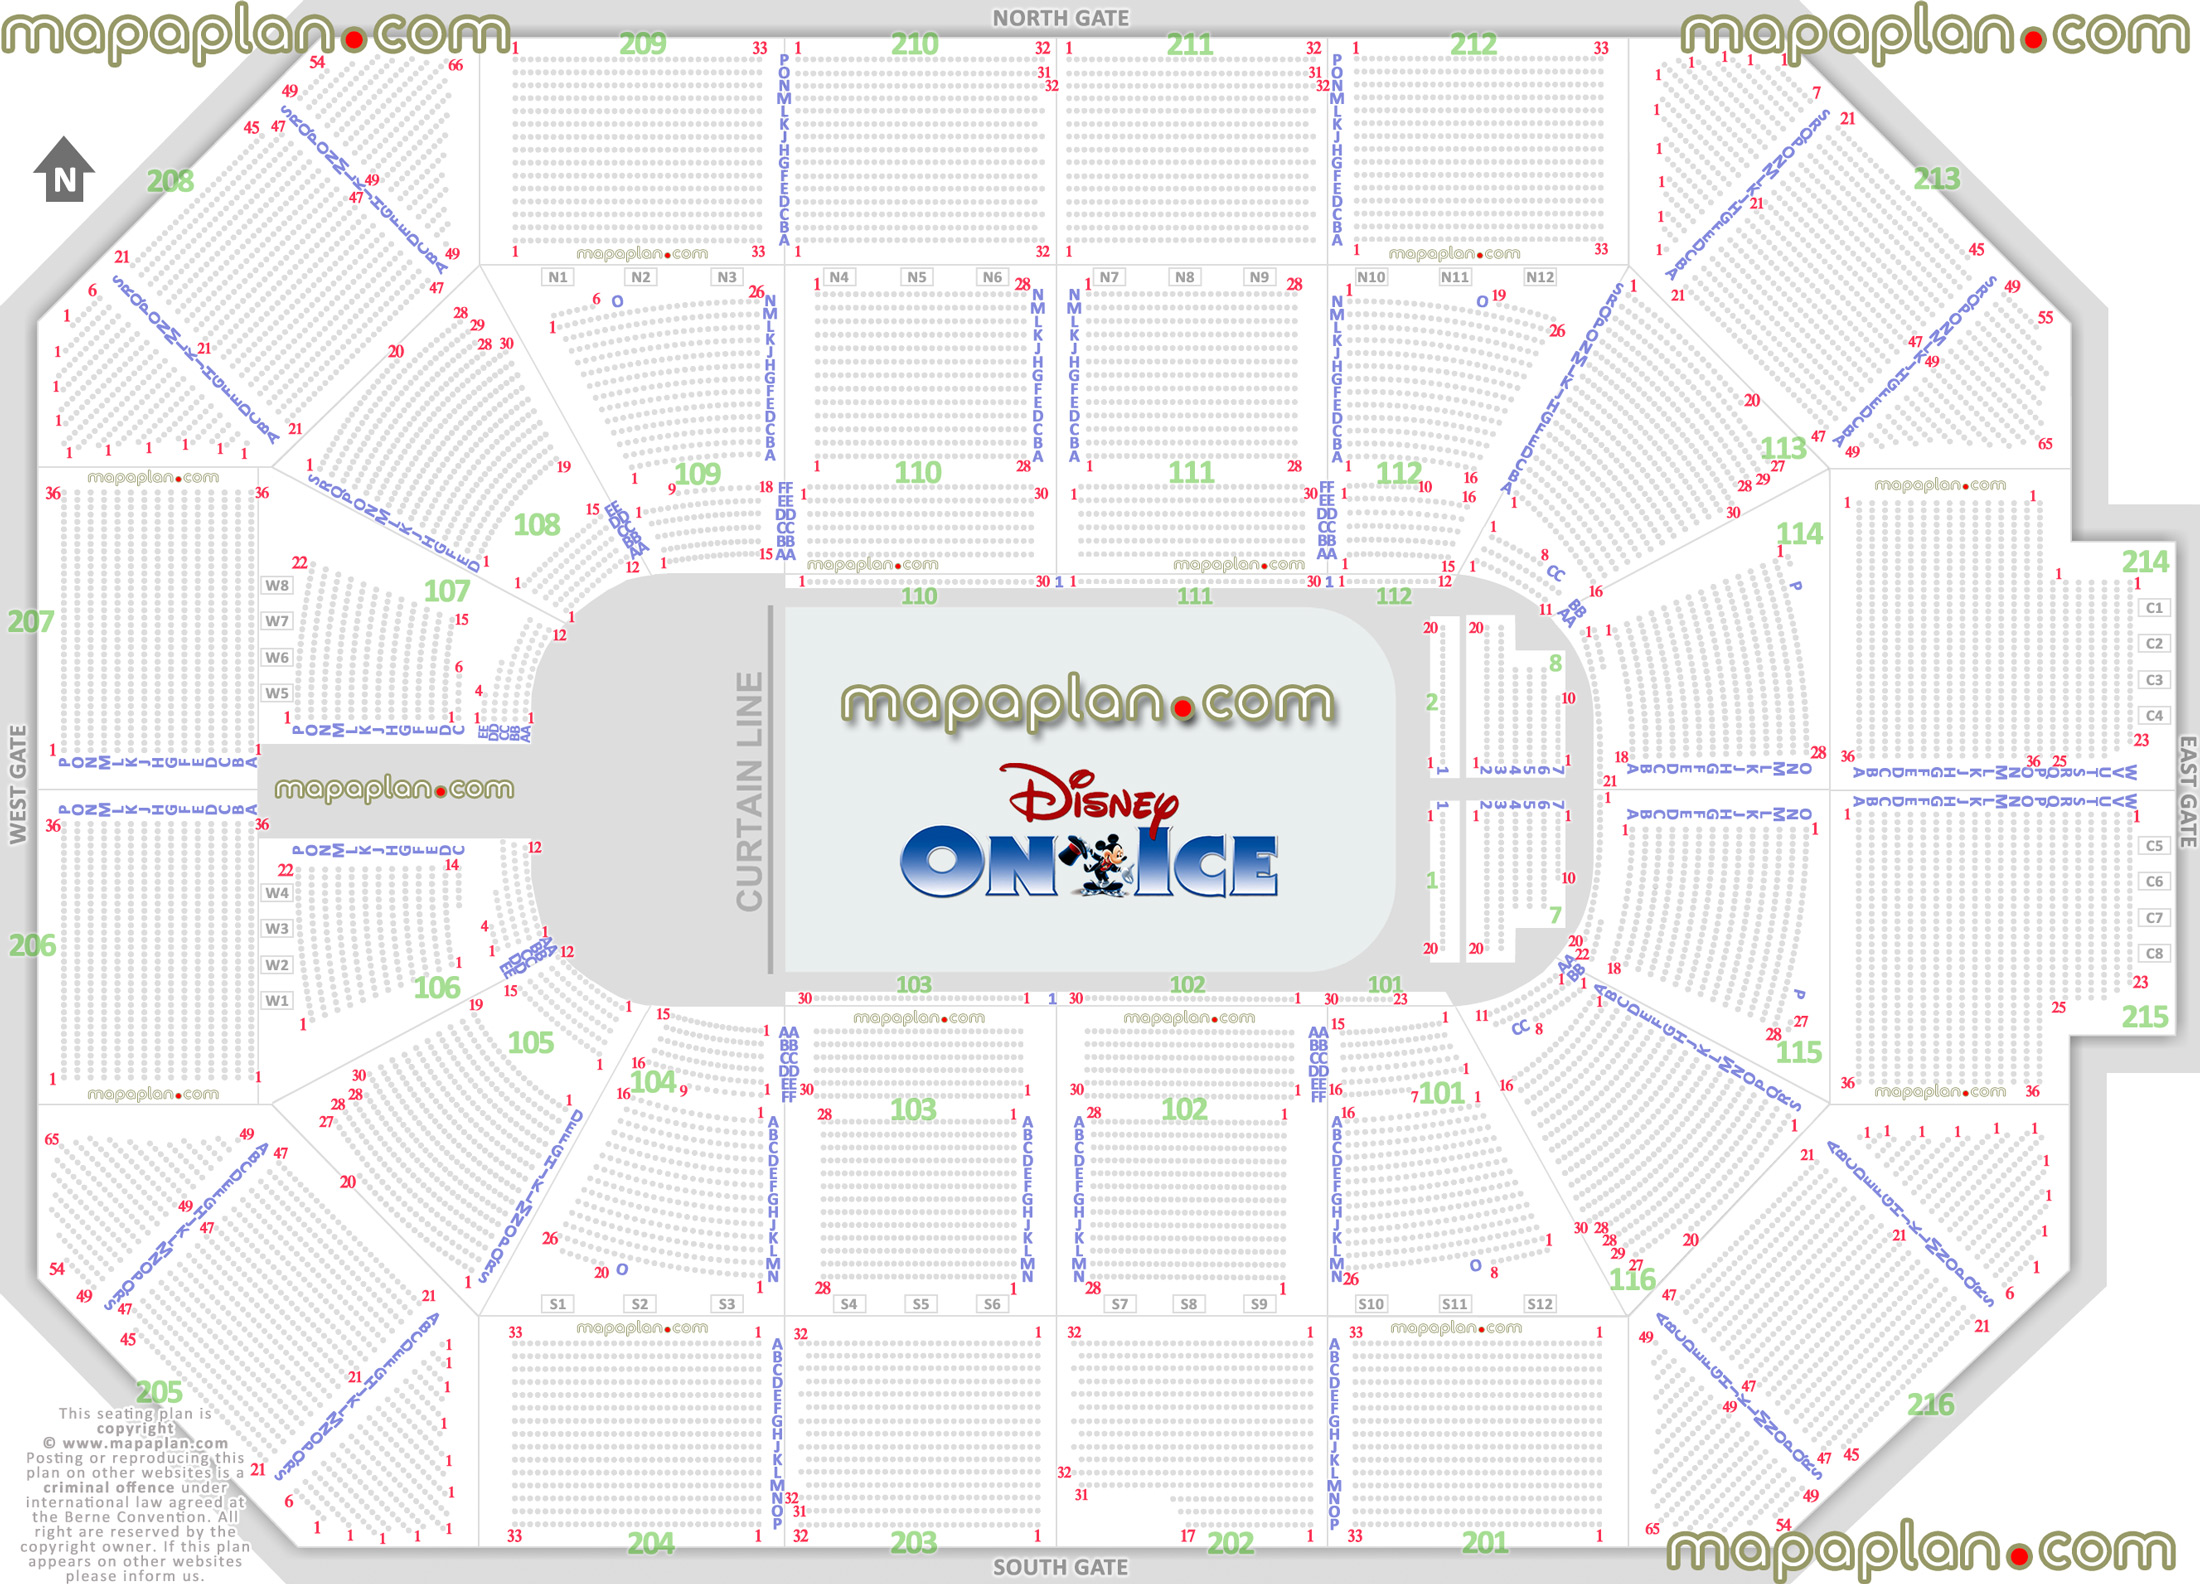 disney ice printable virtual information guide full exact row letters numbers floor plan row aa bb cc dd ee ff a b c d e f g h j k l m n p q r s t u v w Rosemont Allstate Arena seating chart